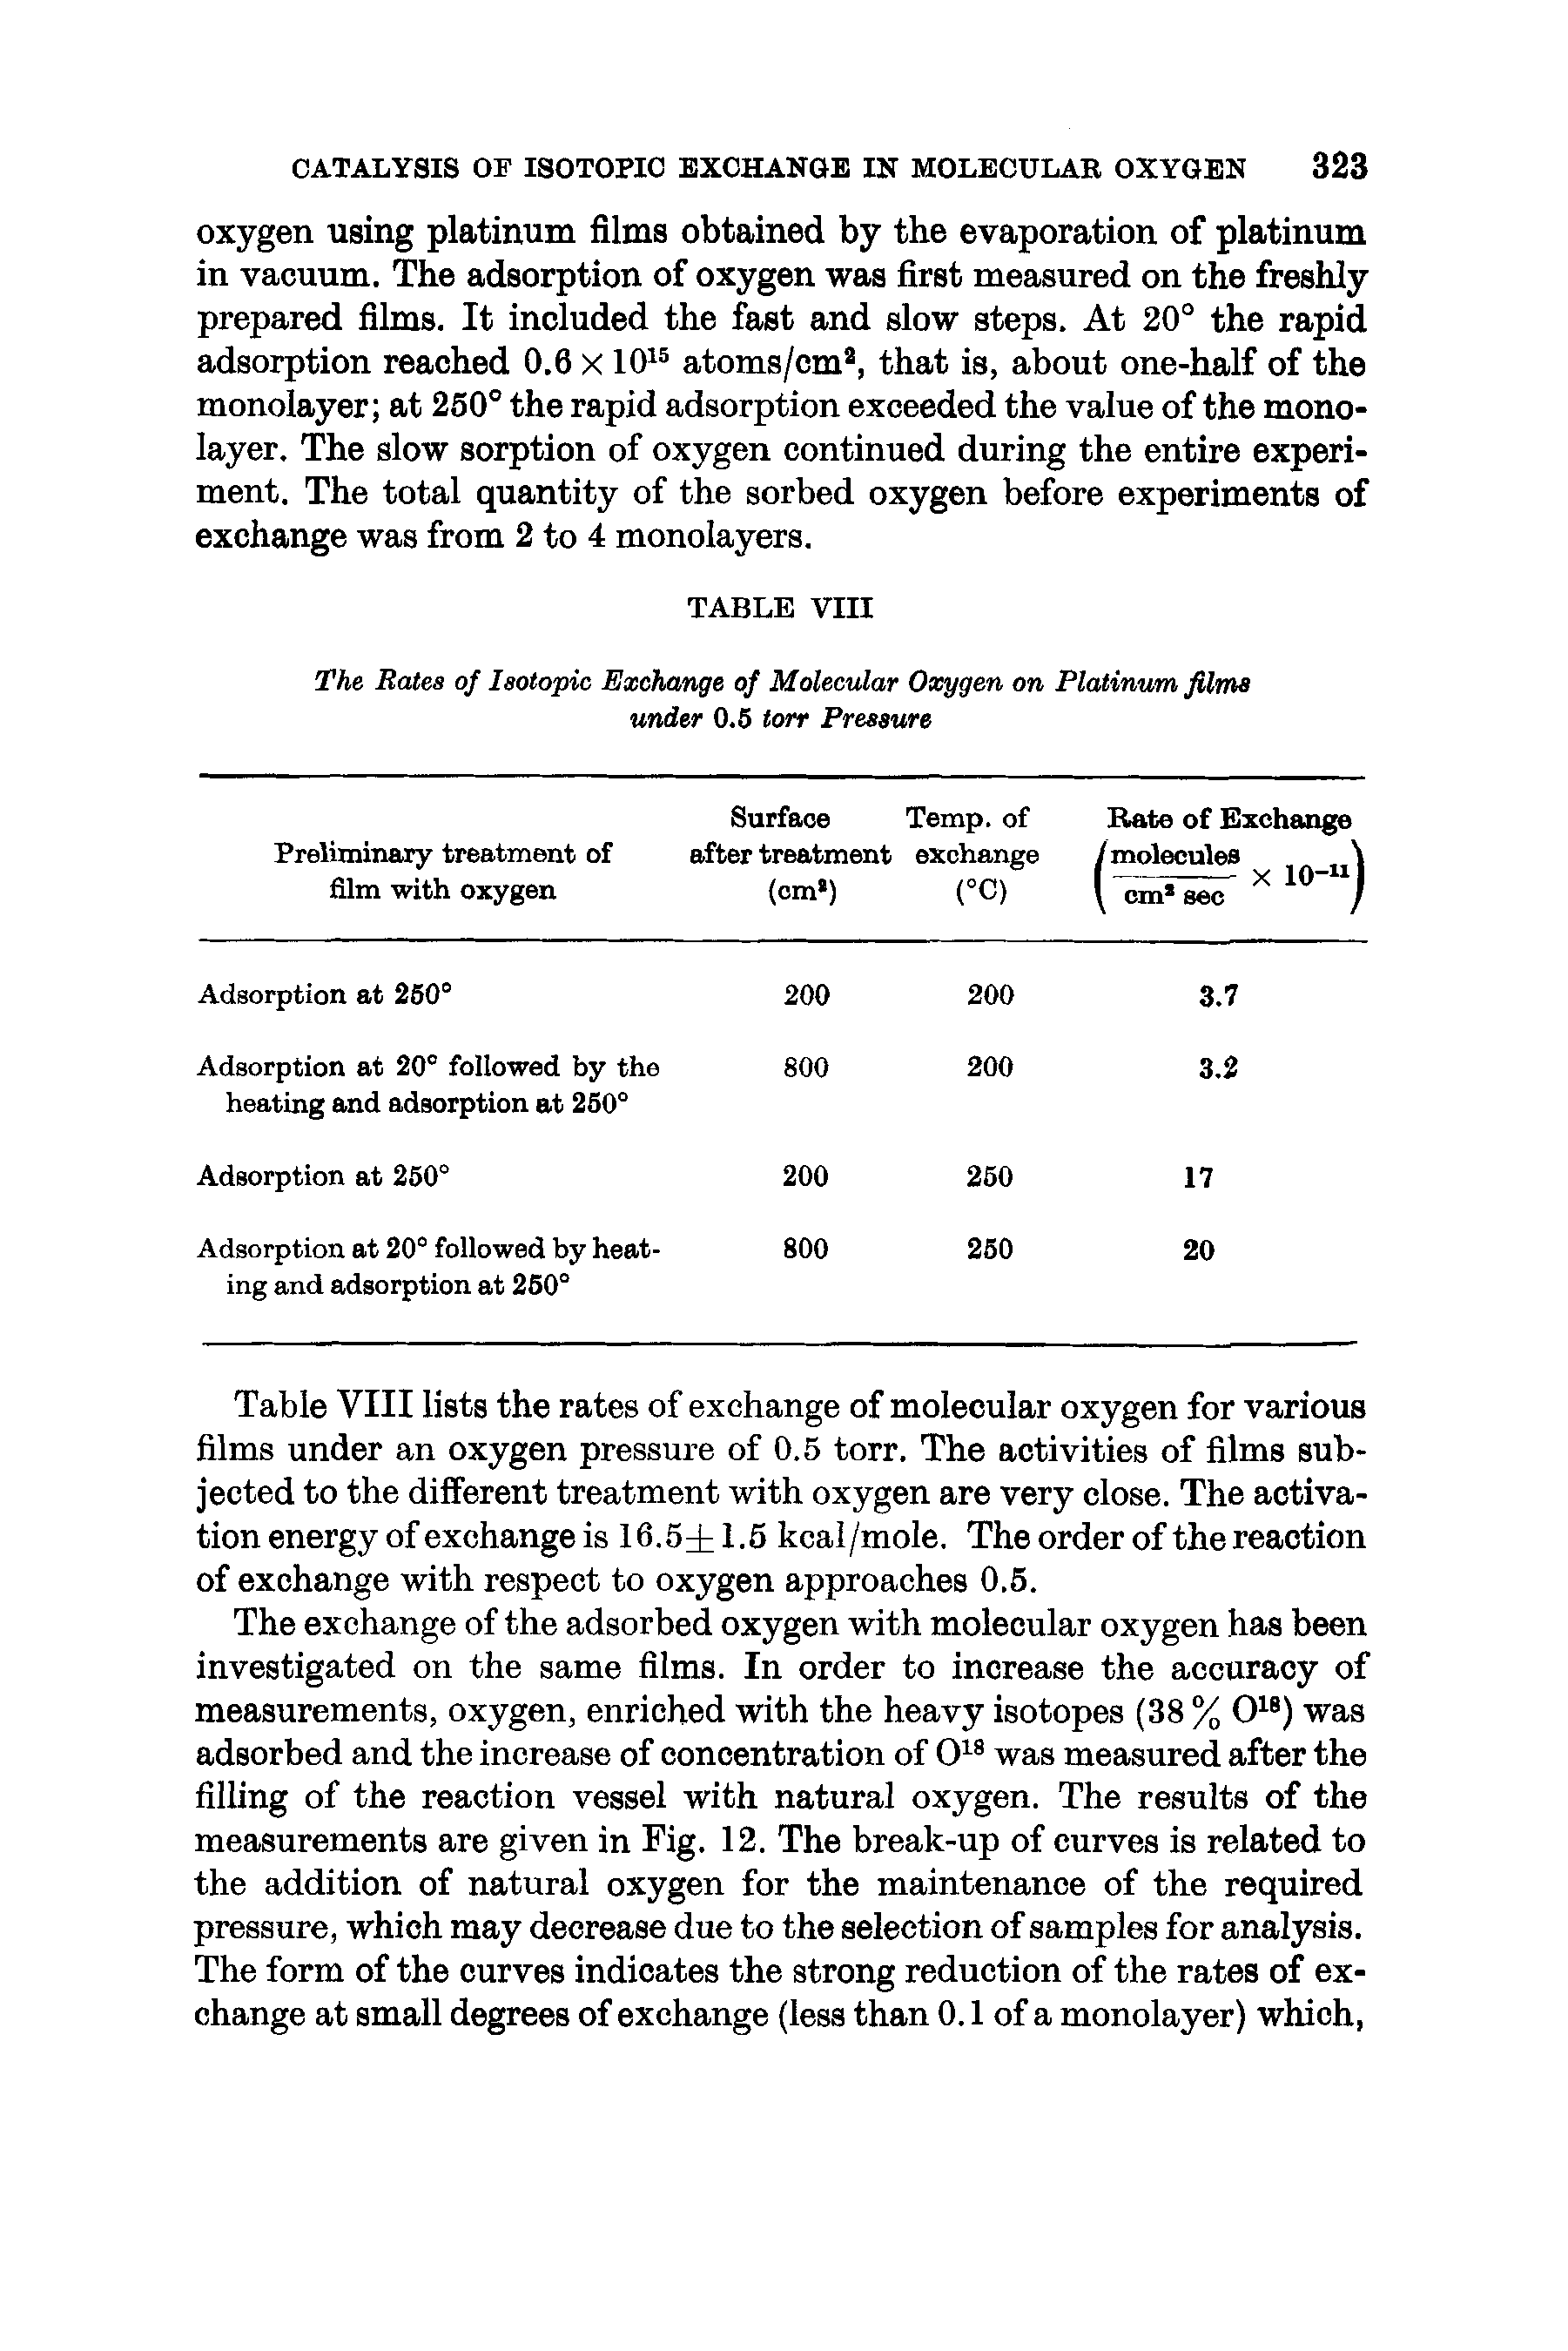 Table VIII lists the rates of exchange of molecular oxygen for various films under an oxygen pressure of 0.5 torr. The activities of films subjected to the different treatment with oxygen are very close. The activation energy of exchange is 16.5ztl.5 kcal/mole. The order of the reaction of exchange with respect to oxygen approaches 0.5.